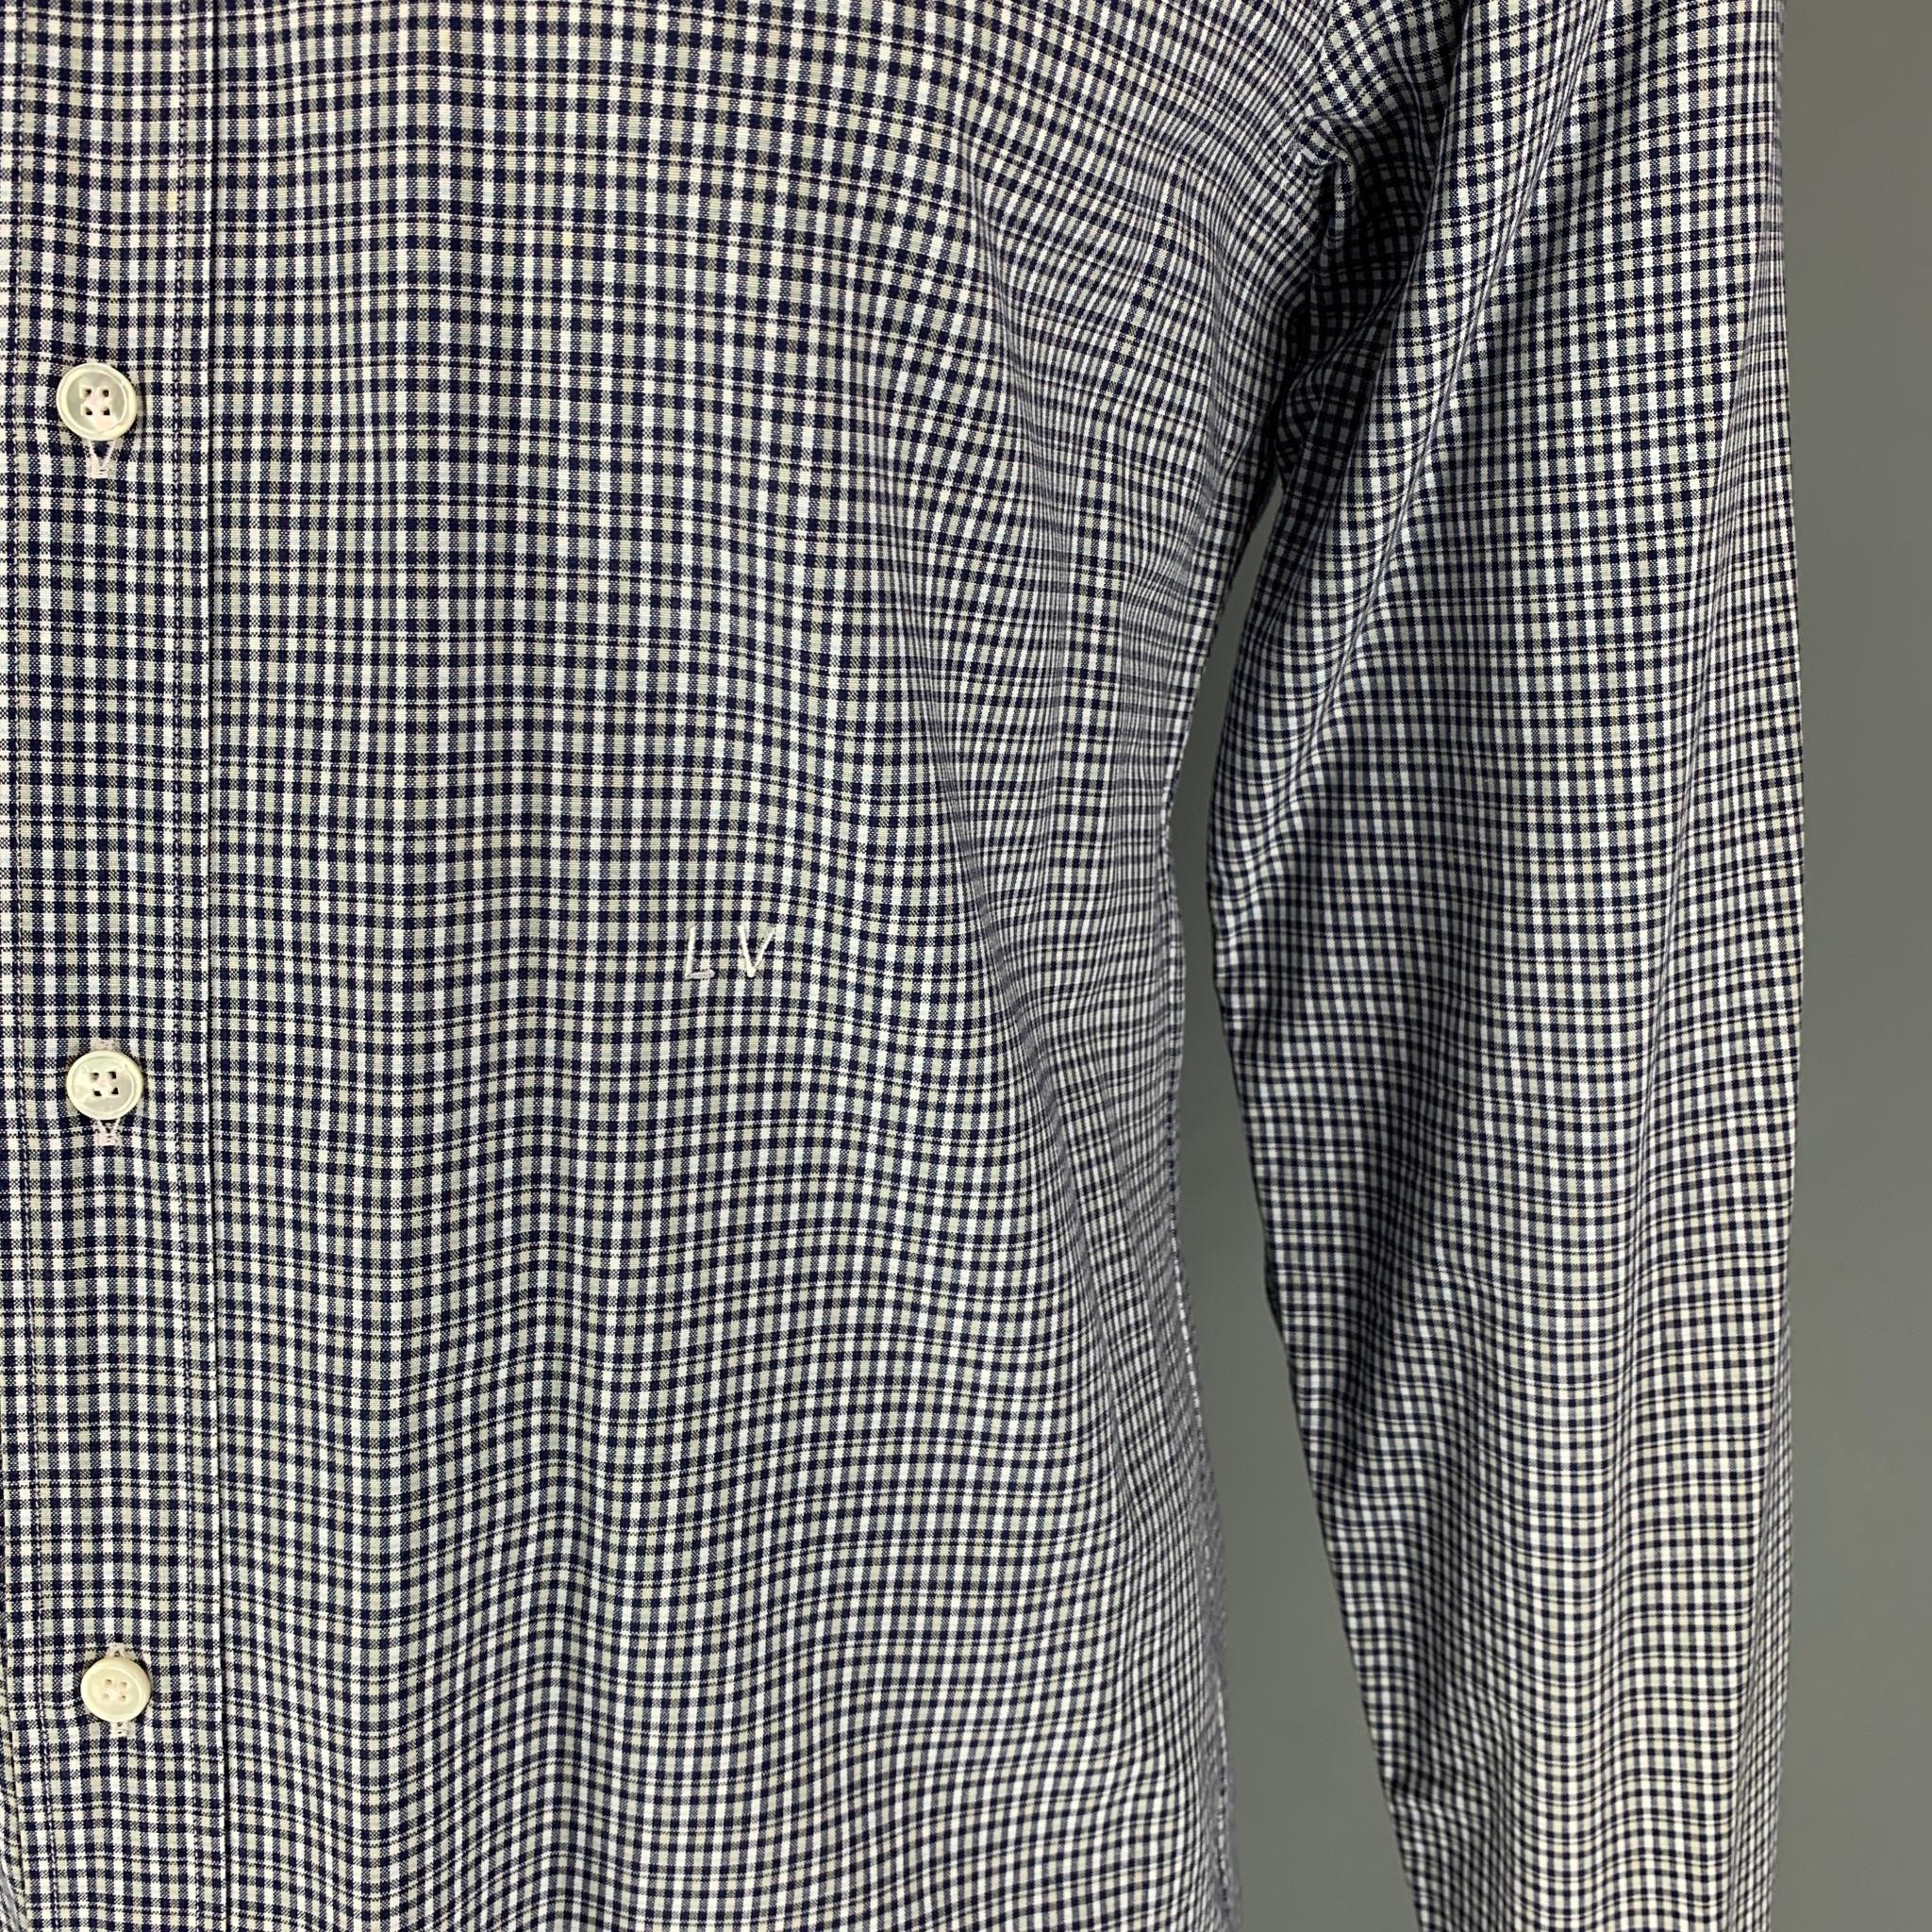 LOUIS VUITTON long sleeve shirt comes in a white & navy plaid cotton featuring a spread collar, small embroidered logo, and a button up closure. Made in Italy. 

Excellent Pre-Owned Condition.
Marked: XL

Measurements:

Shoulder: 18.5 in.
Chest: 44